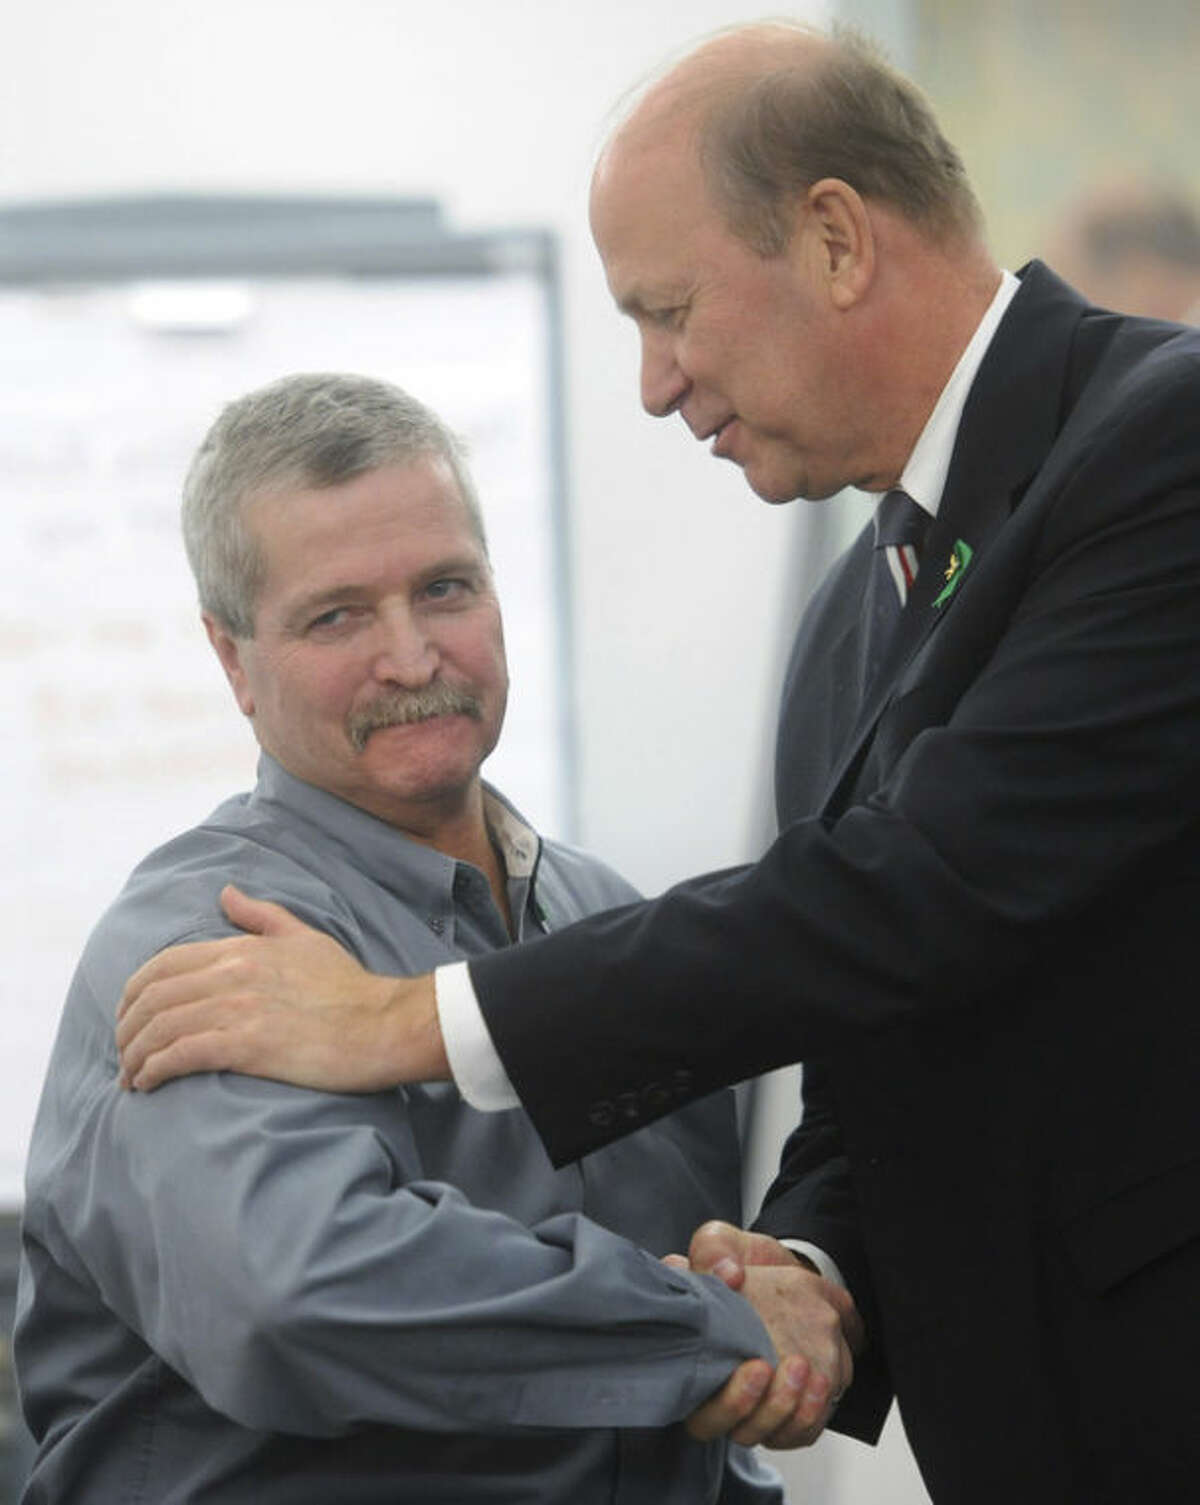 In this April 17, 2013 photo, Robert Nute, left, is congratulated by Newtown Police Chief Michael Kehoe after winning an emergency telecommunications award, at the Newtown Municipal Center in Newtown, Conn. Nute, of the Newtown Emergency Communications Center, handled dispatch calls during the Sandy Hook Elementary School shooting on Dec. 14, 2012. The dispatchers at the Newtown center have won praise from officials and colleagues around the country for their role in the response to the shooting. The call center director said the staff has been lifted by the outpouring of support as the dispatchers recover emotionally, along with the community that still peppers them with calls over anything out of the ordinary. (AP Photo/The News-Times, Tyler Sizemore) MANDATORY CREDIT